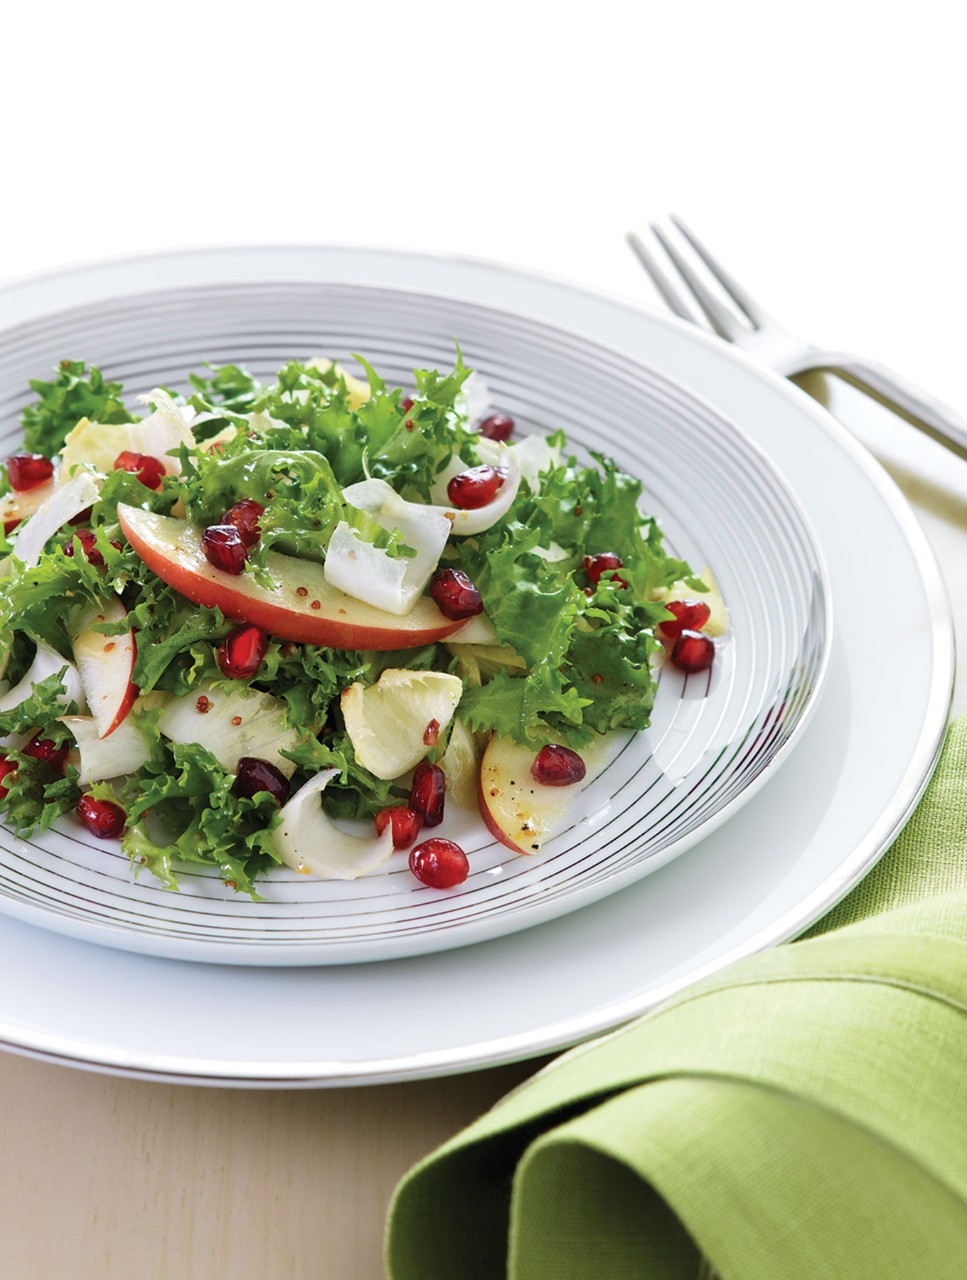 Curly and Belgian Endive with Apple and Pomegranate